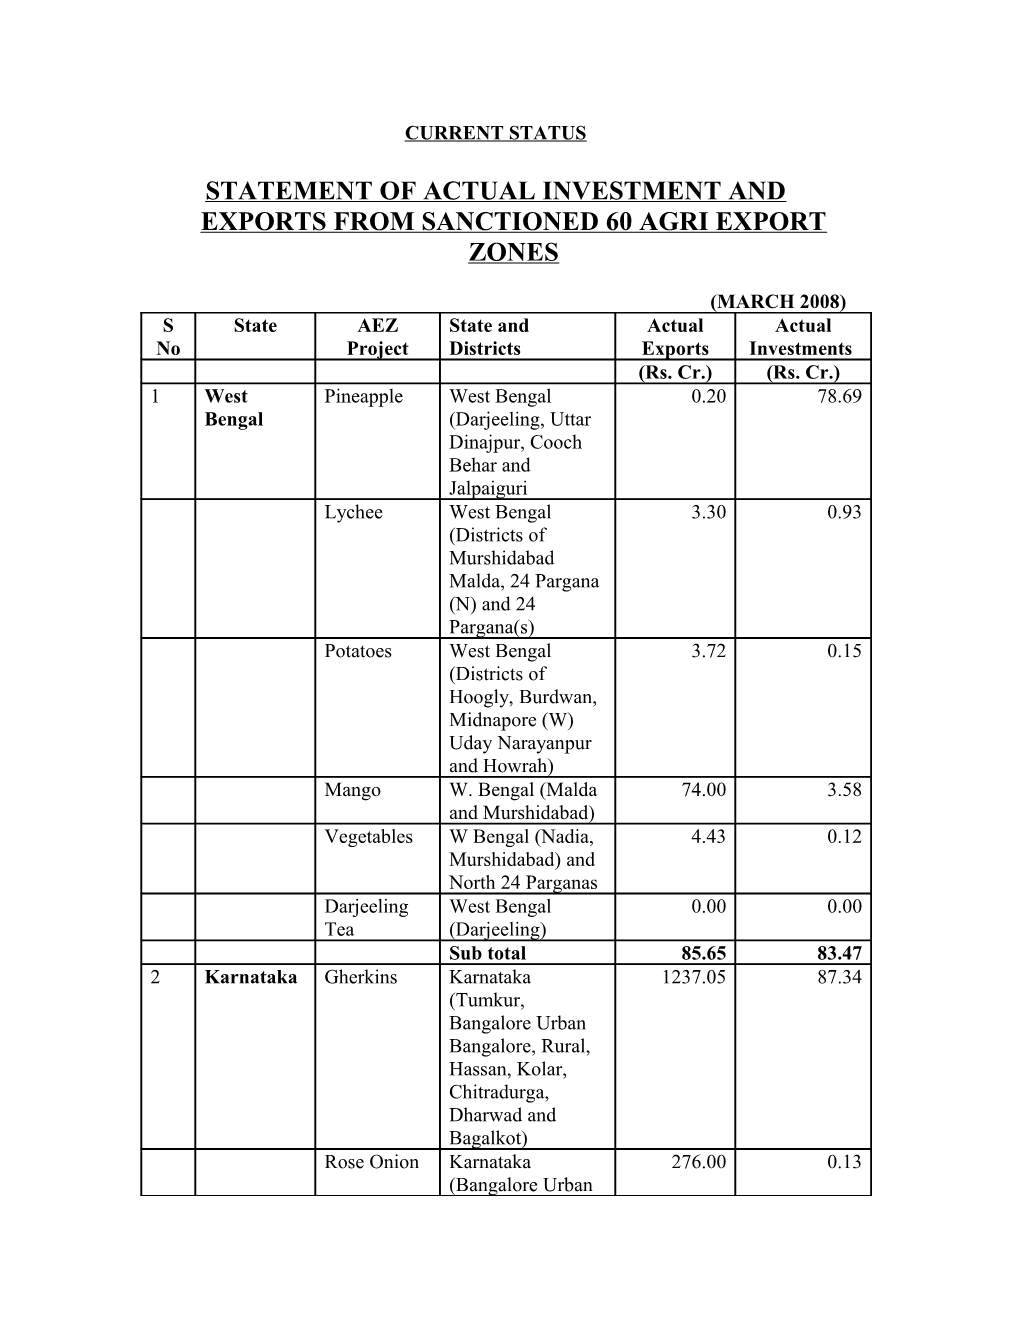 Statement of Actual Investment and Exports from Sanctioned 60 Agri Export Zones